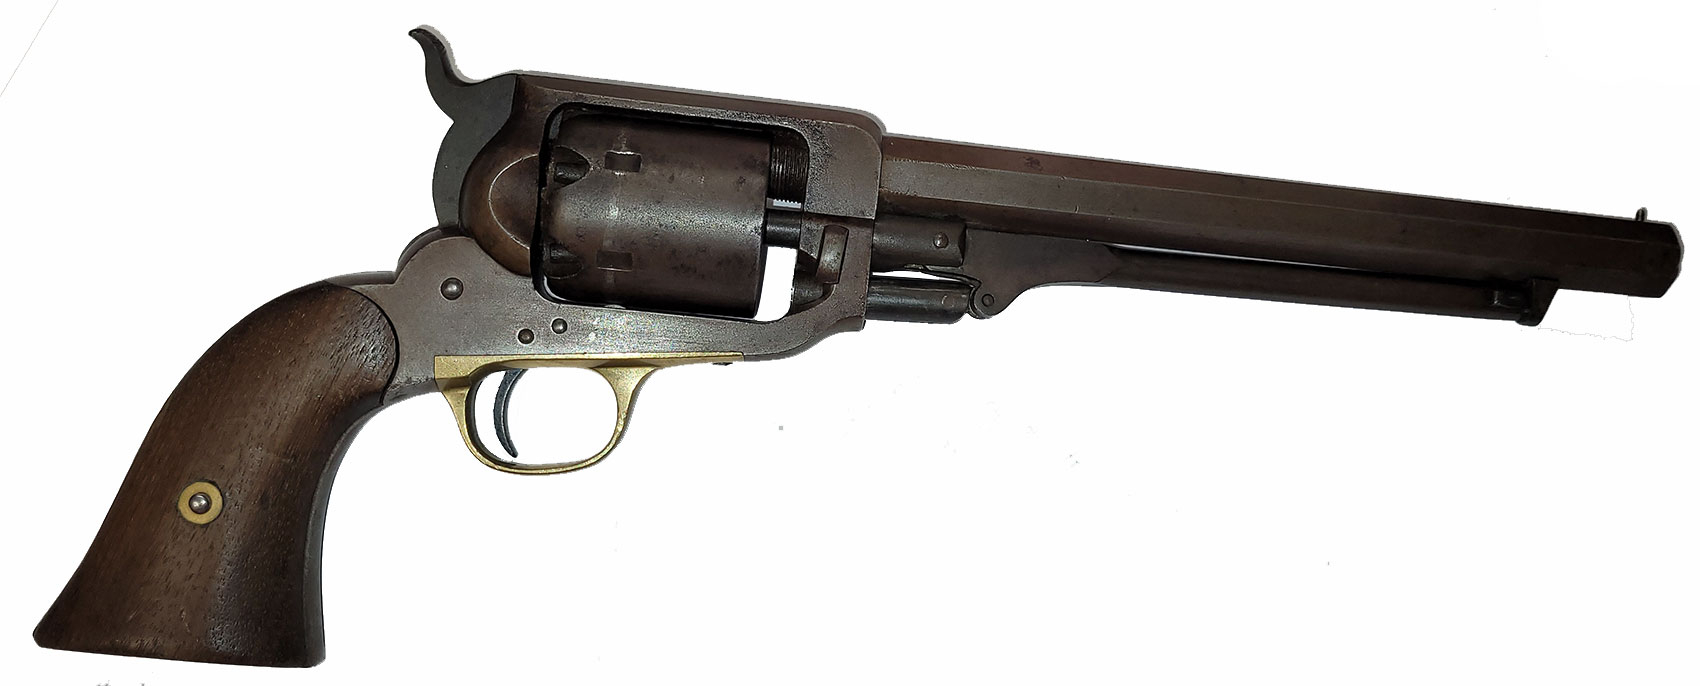 WHITNEY “NAVY” SECOND MODEL REVOLVER IN VERY GOOD CONDITION